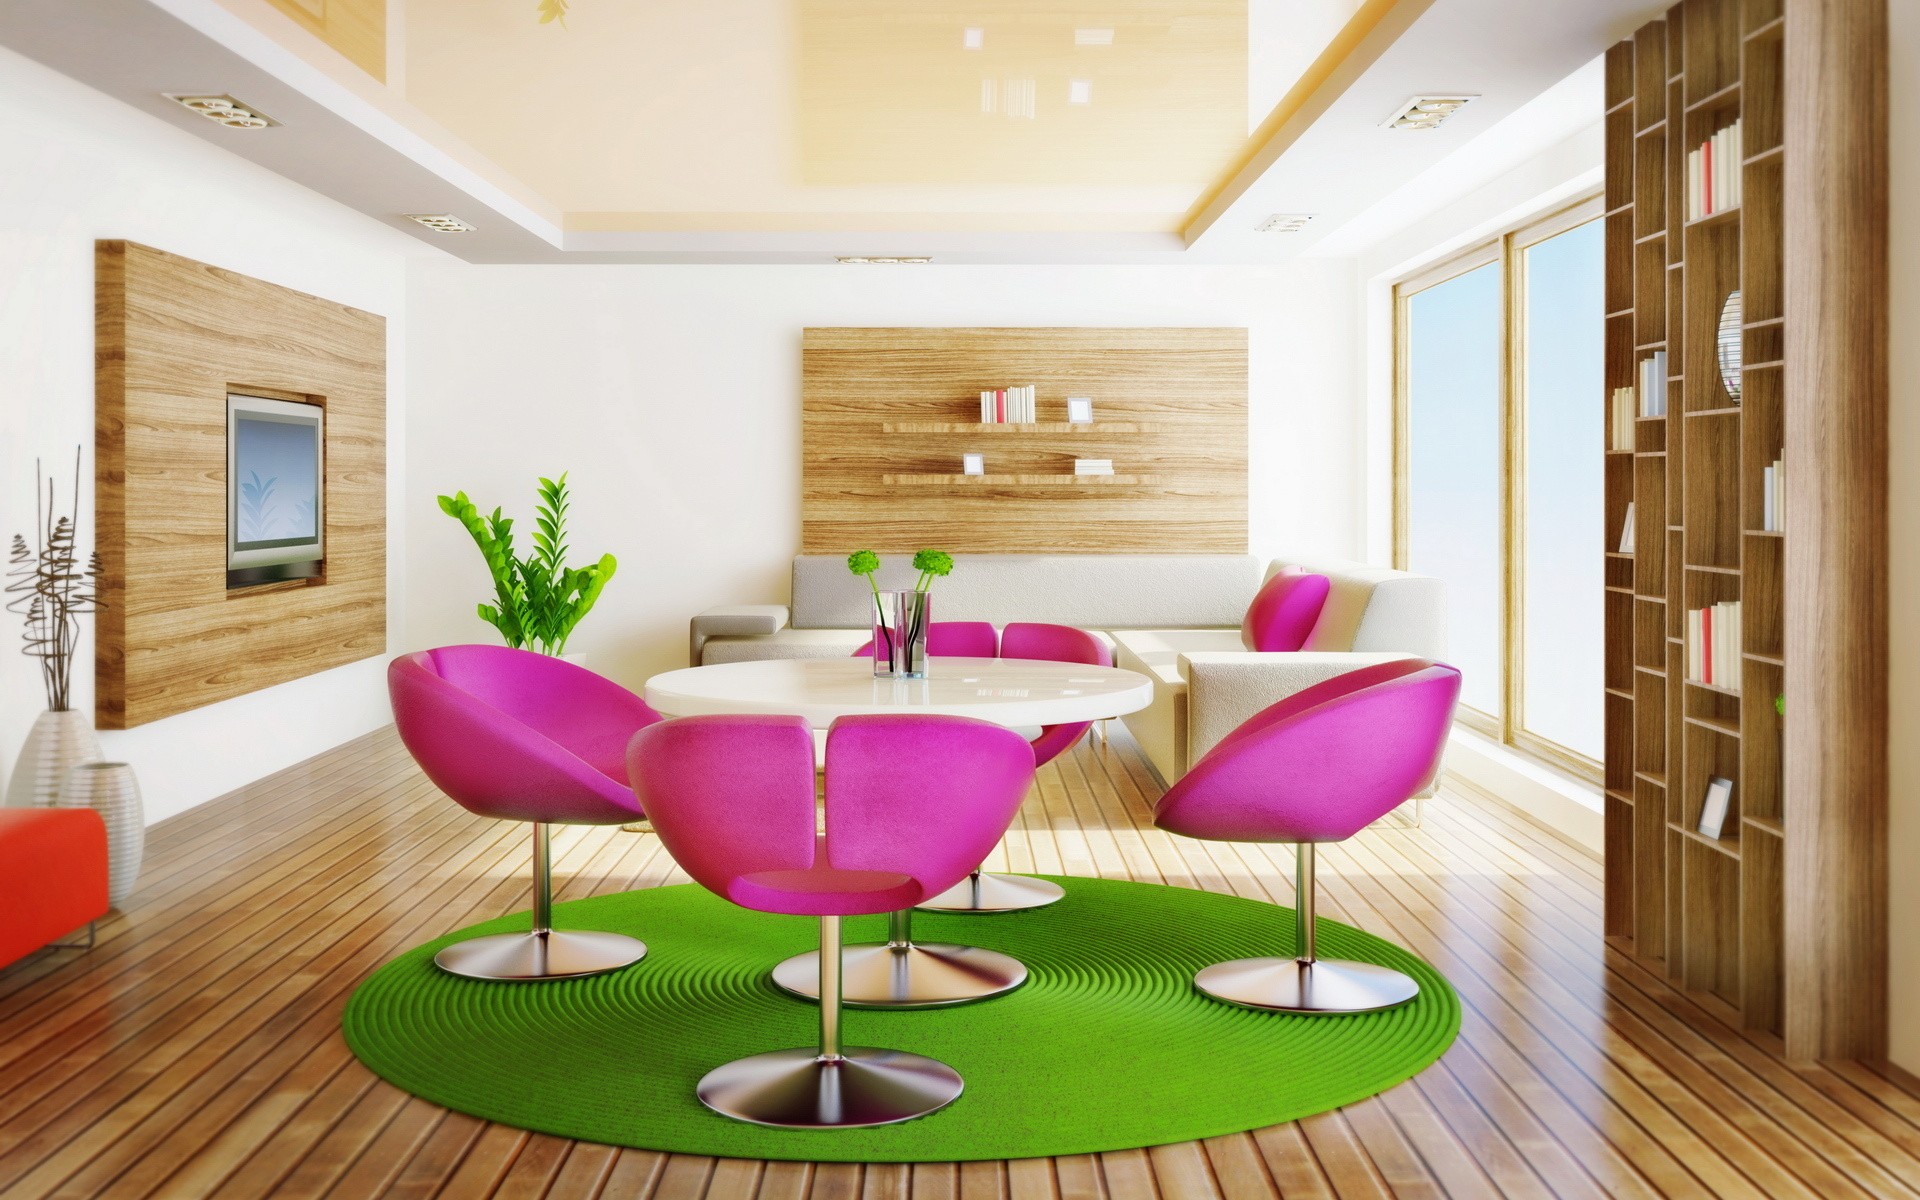 25 Interior Decoration Ideas For Your Home